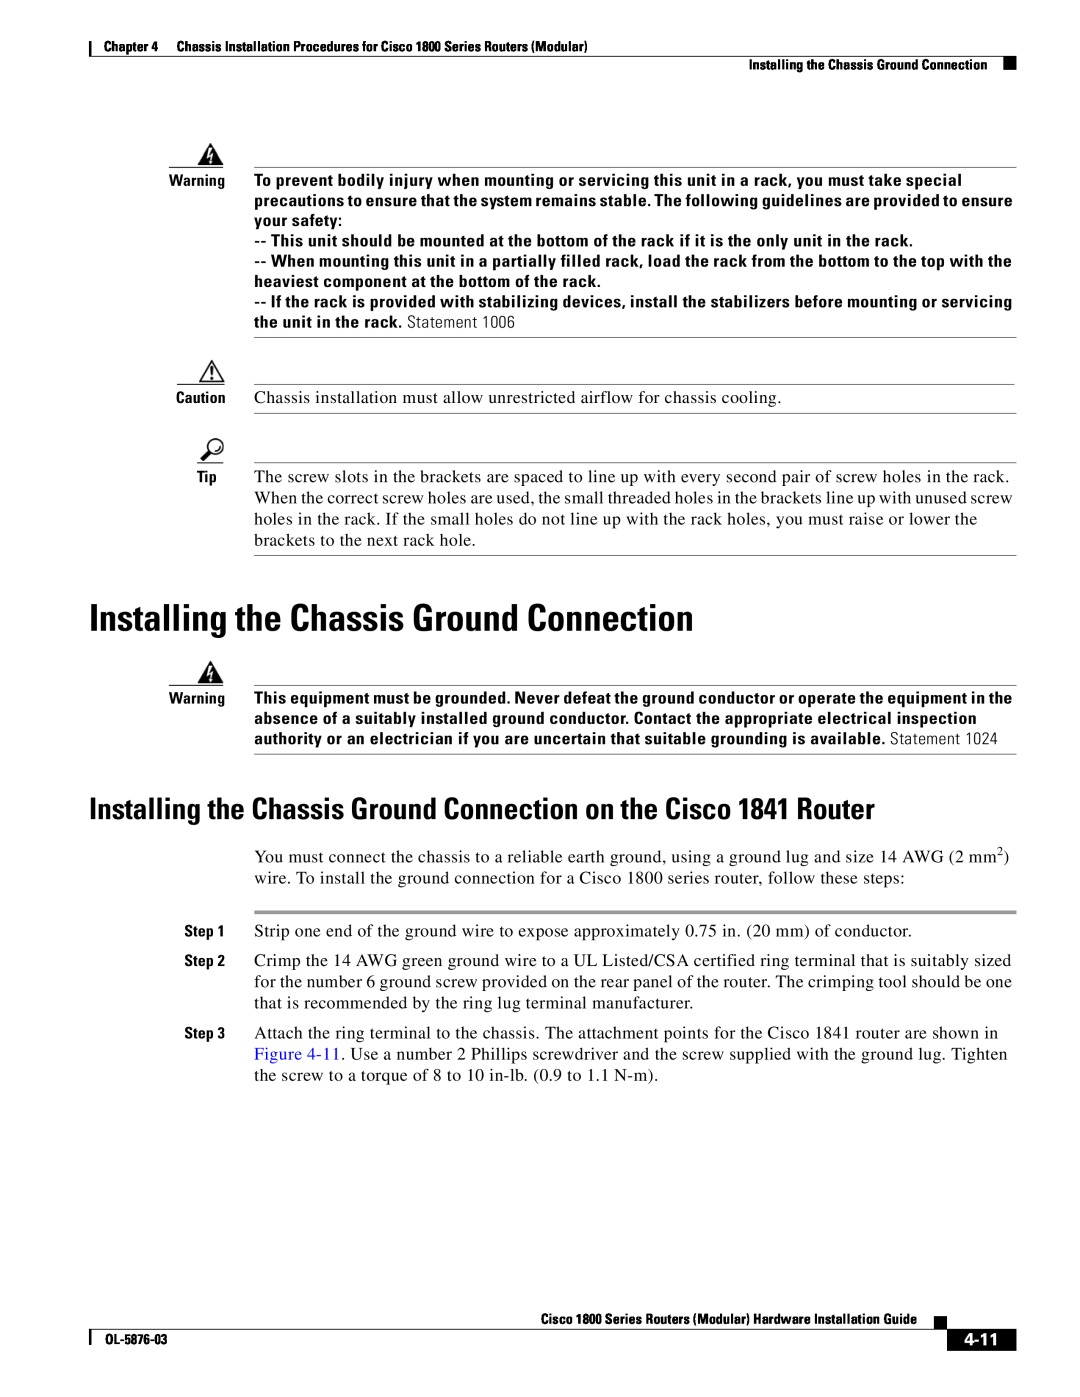 Cisco Systems CISCO1841-HSEC/K9-RF manual Installing the Chassis Ground Connection, 4-11 